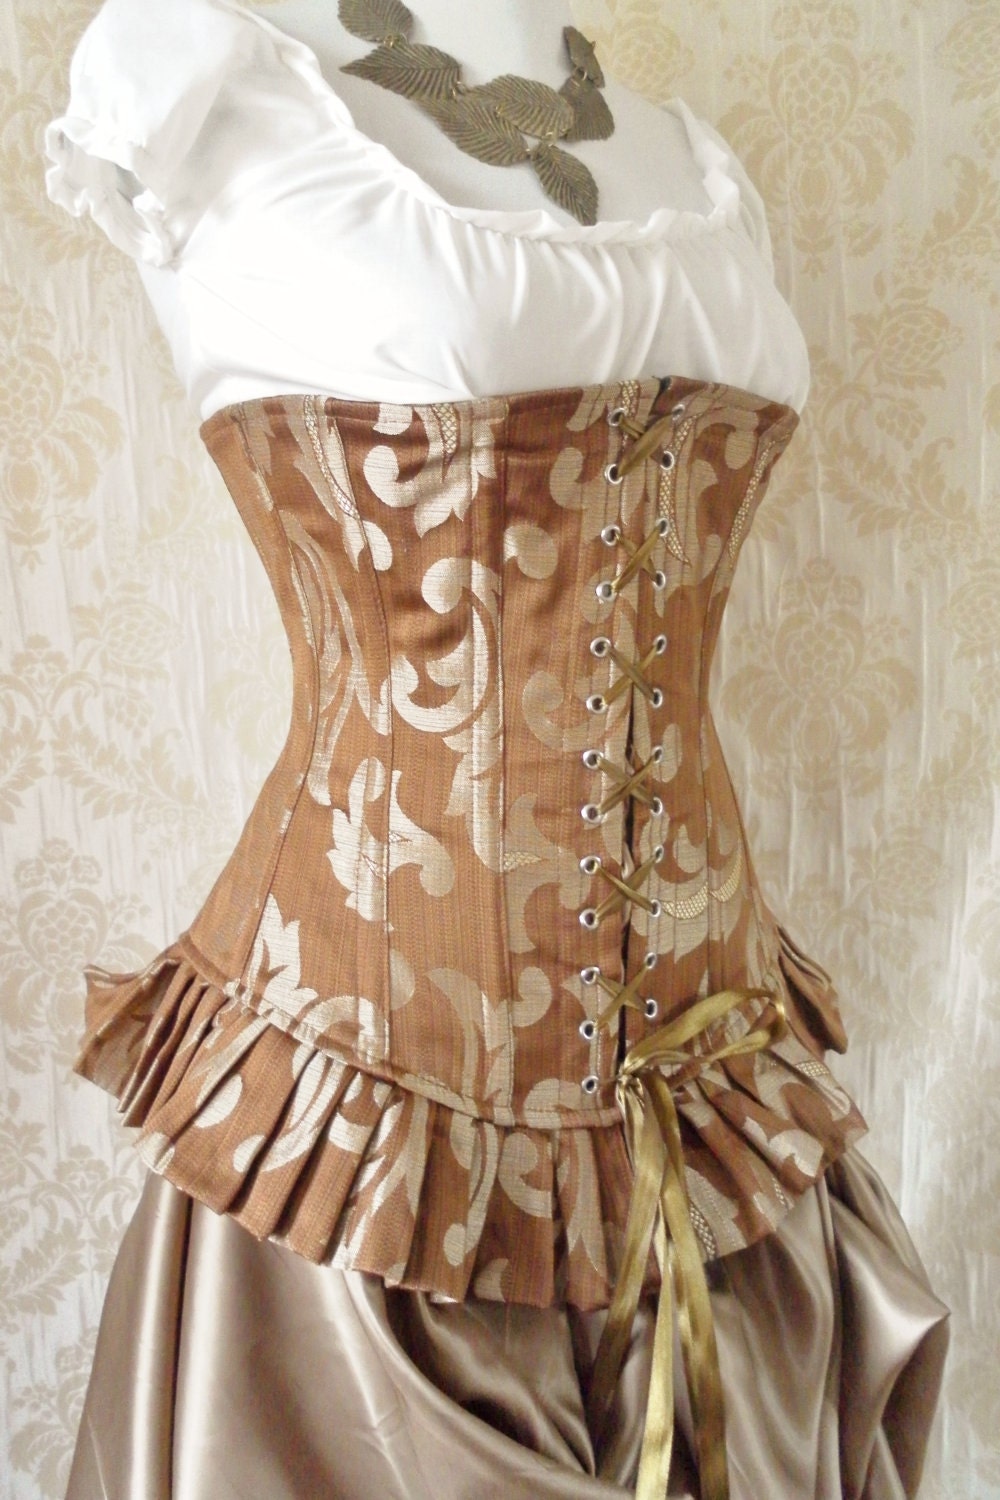 Parisienne frill underbust corset-caramel brown and gold tapestry steel boned burlesque corset, to fit 28-29 inch waist